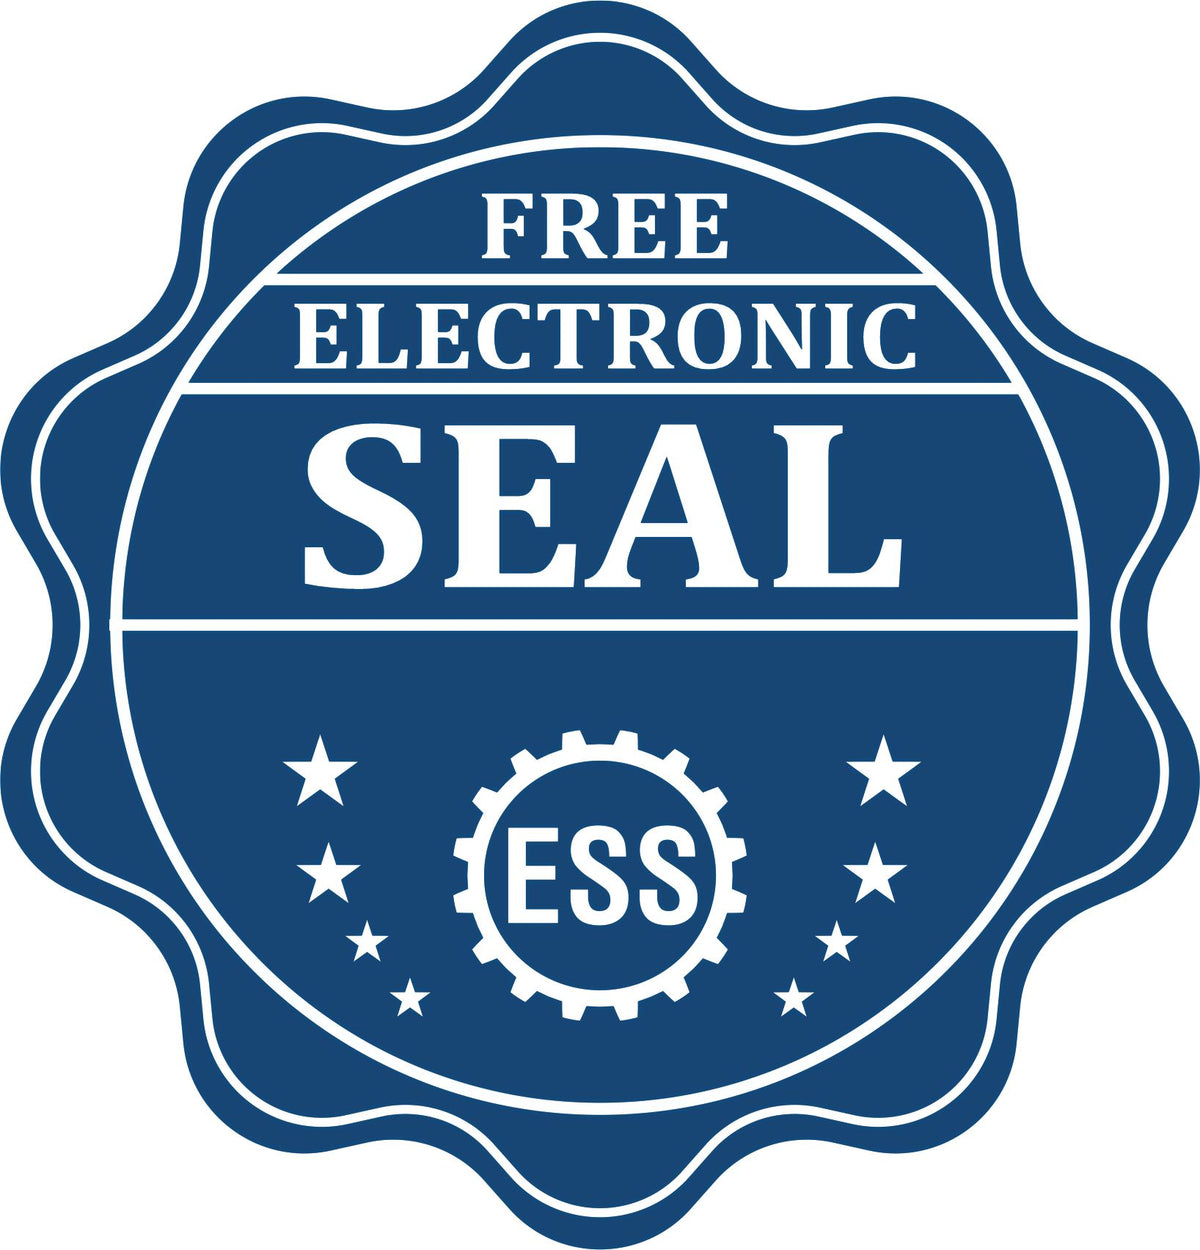 A badge showing a free electronic seal for the PSI Maine Notary Stamp with stars and the ESS gear on the emblem.